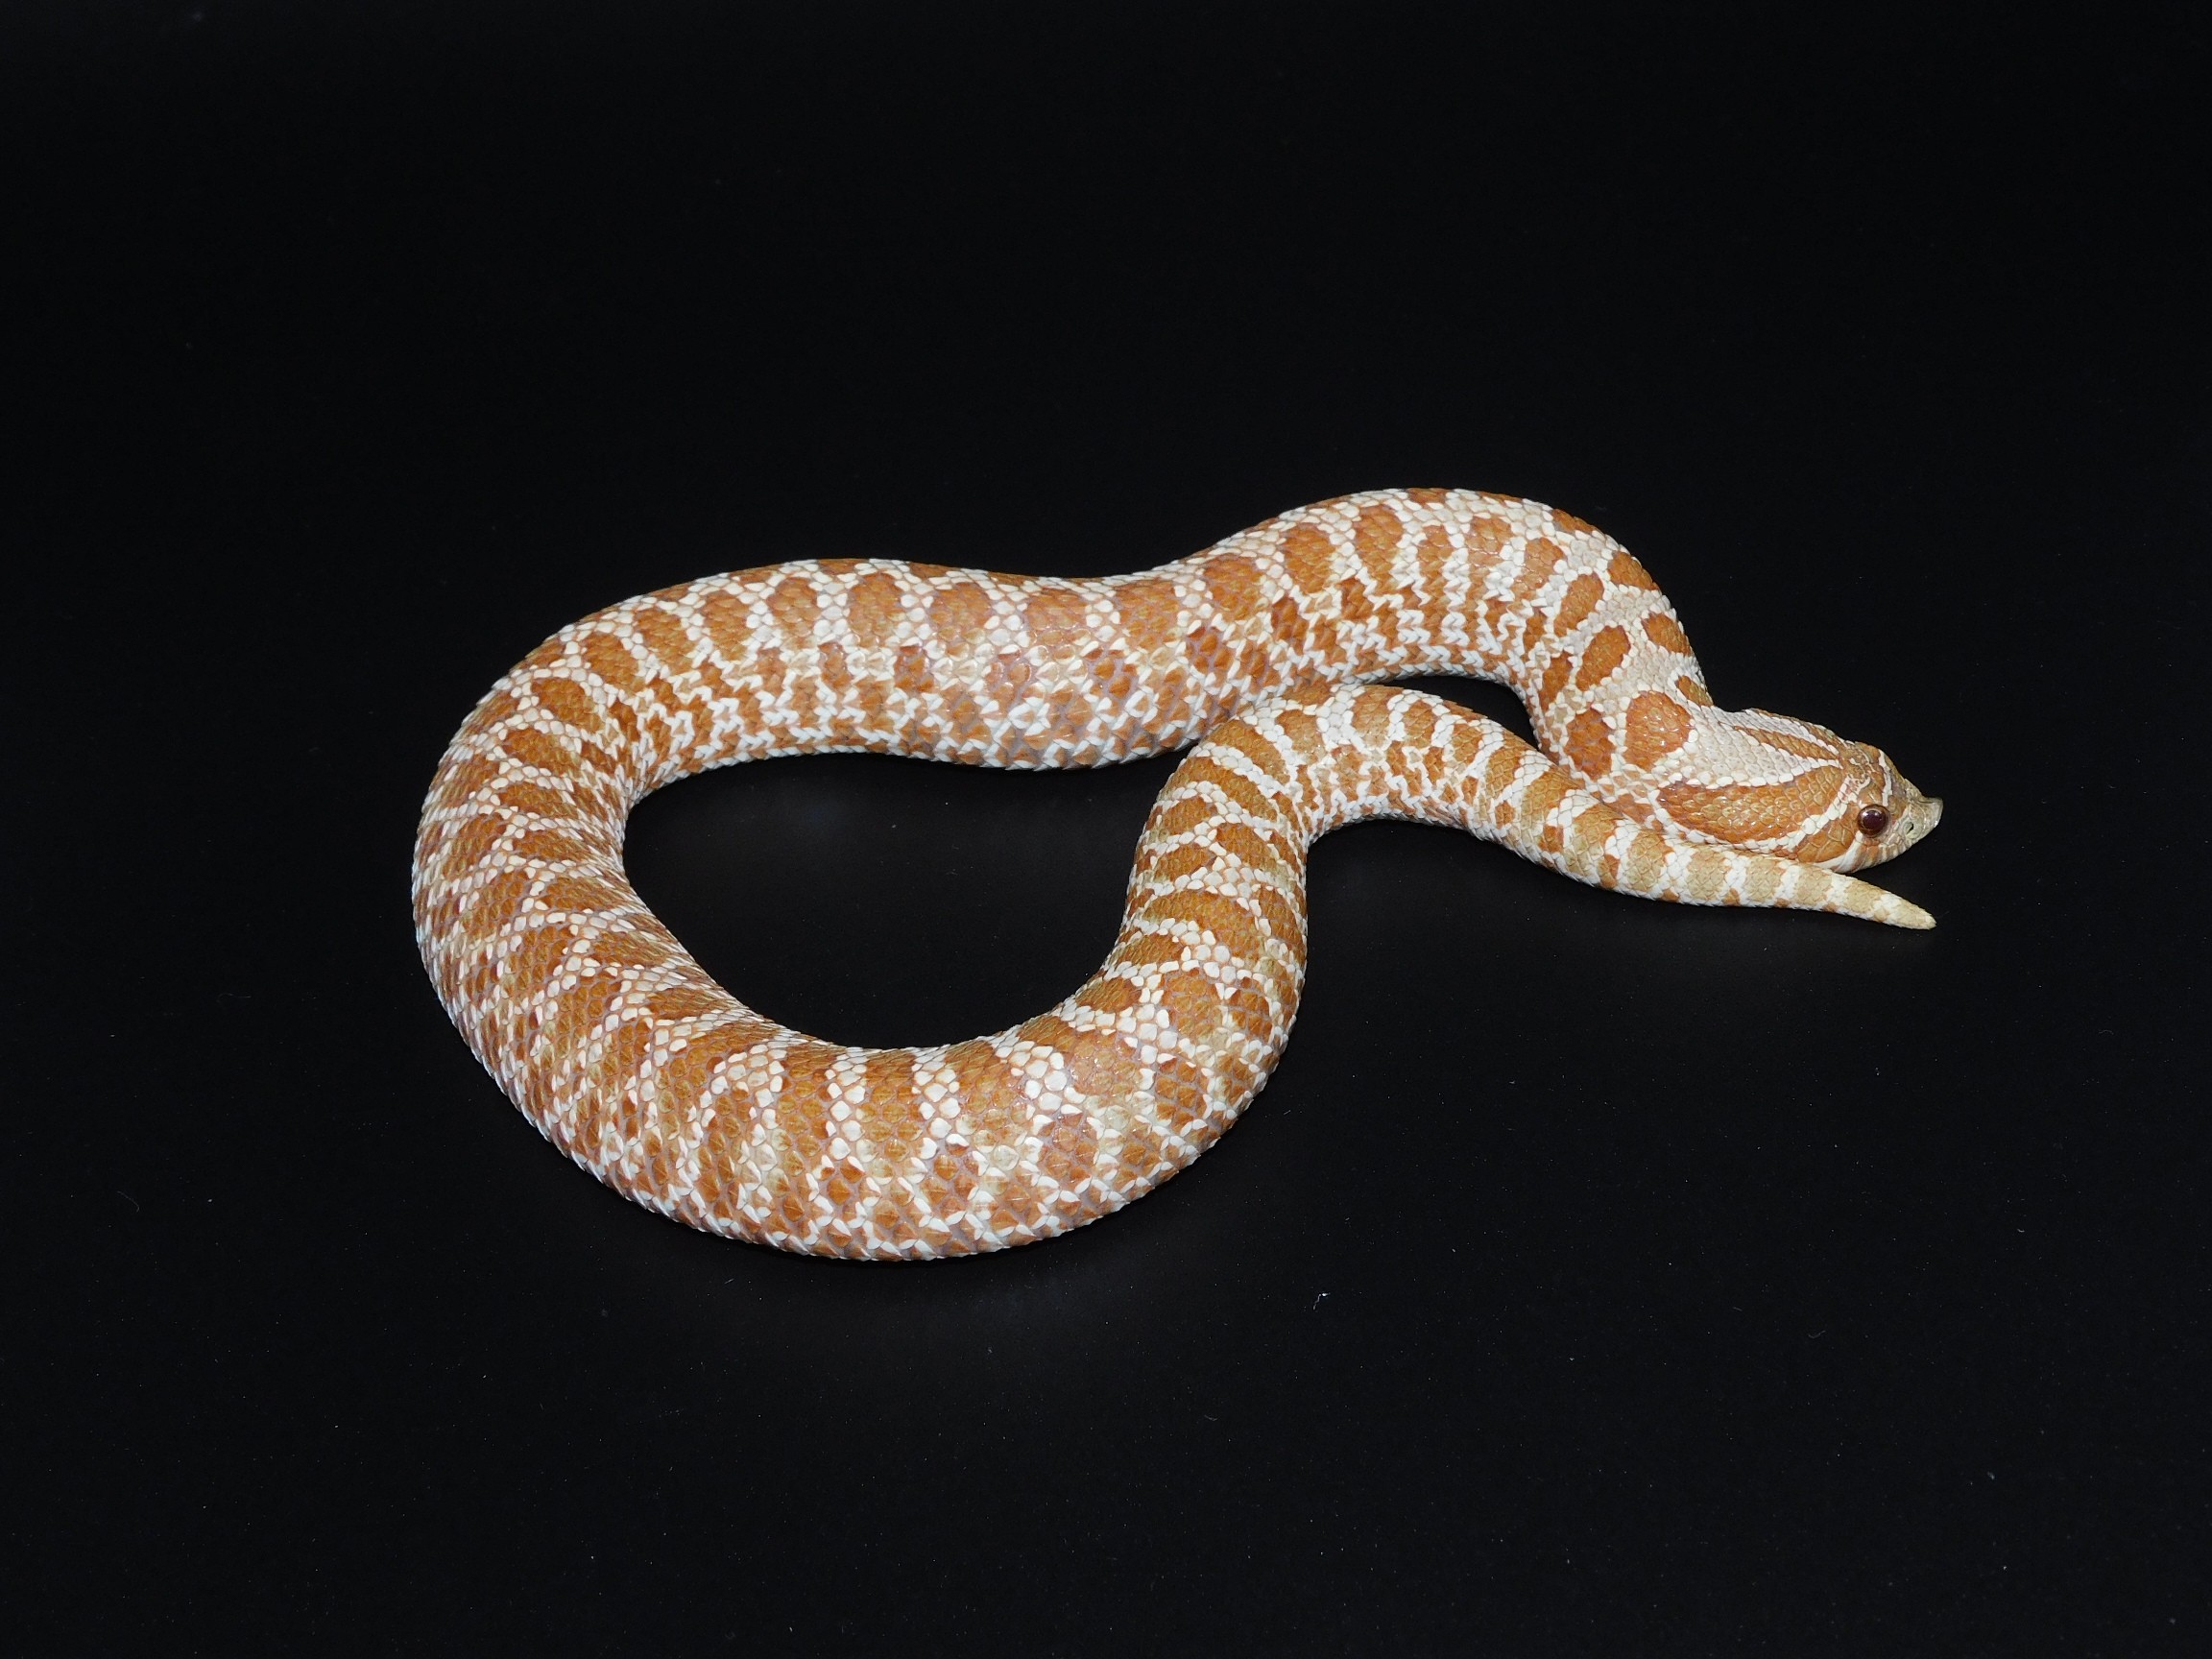 Evans Hypo Western Hognose by GSL Reptiles